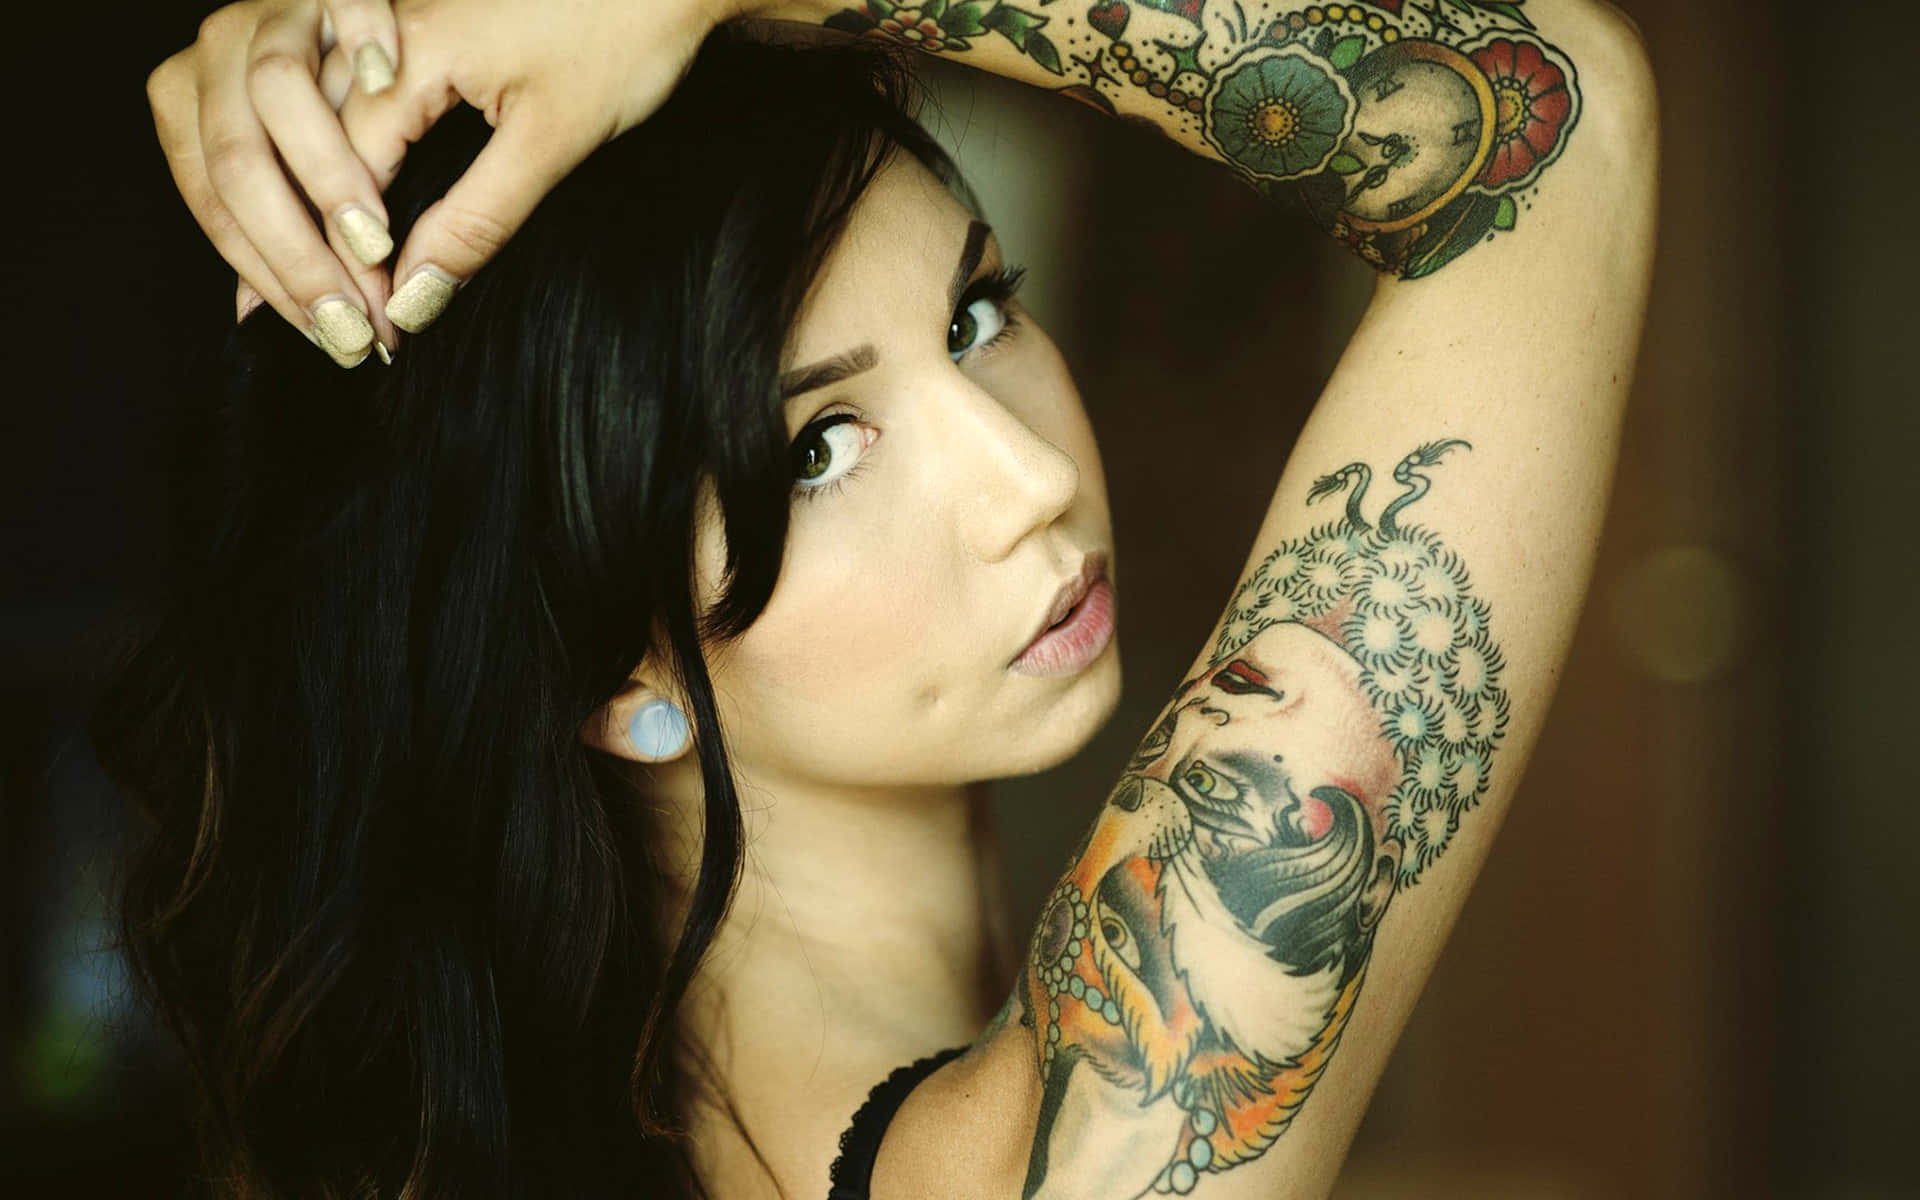 A beautiful pin up style girl wearing a colorful tattoo.